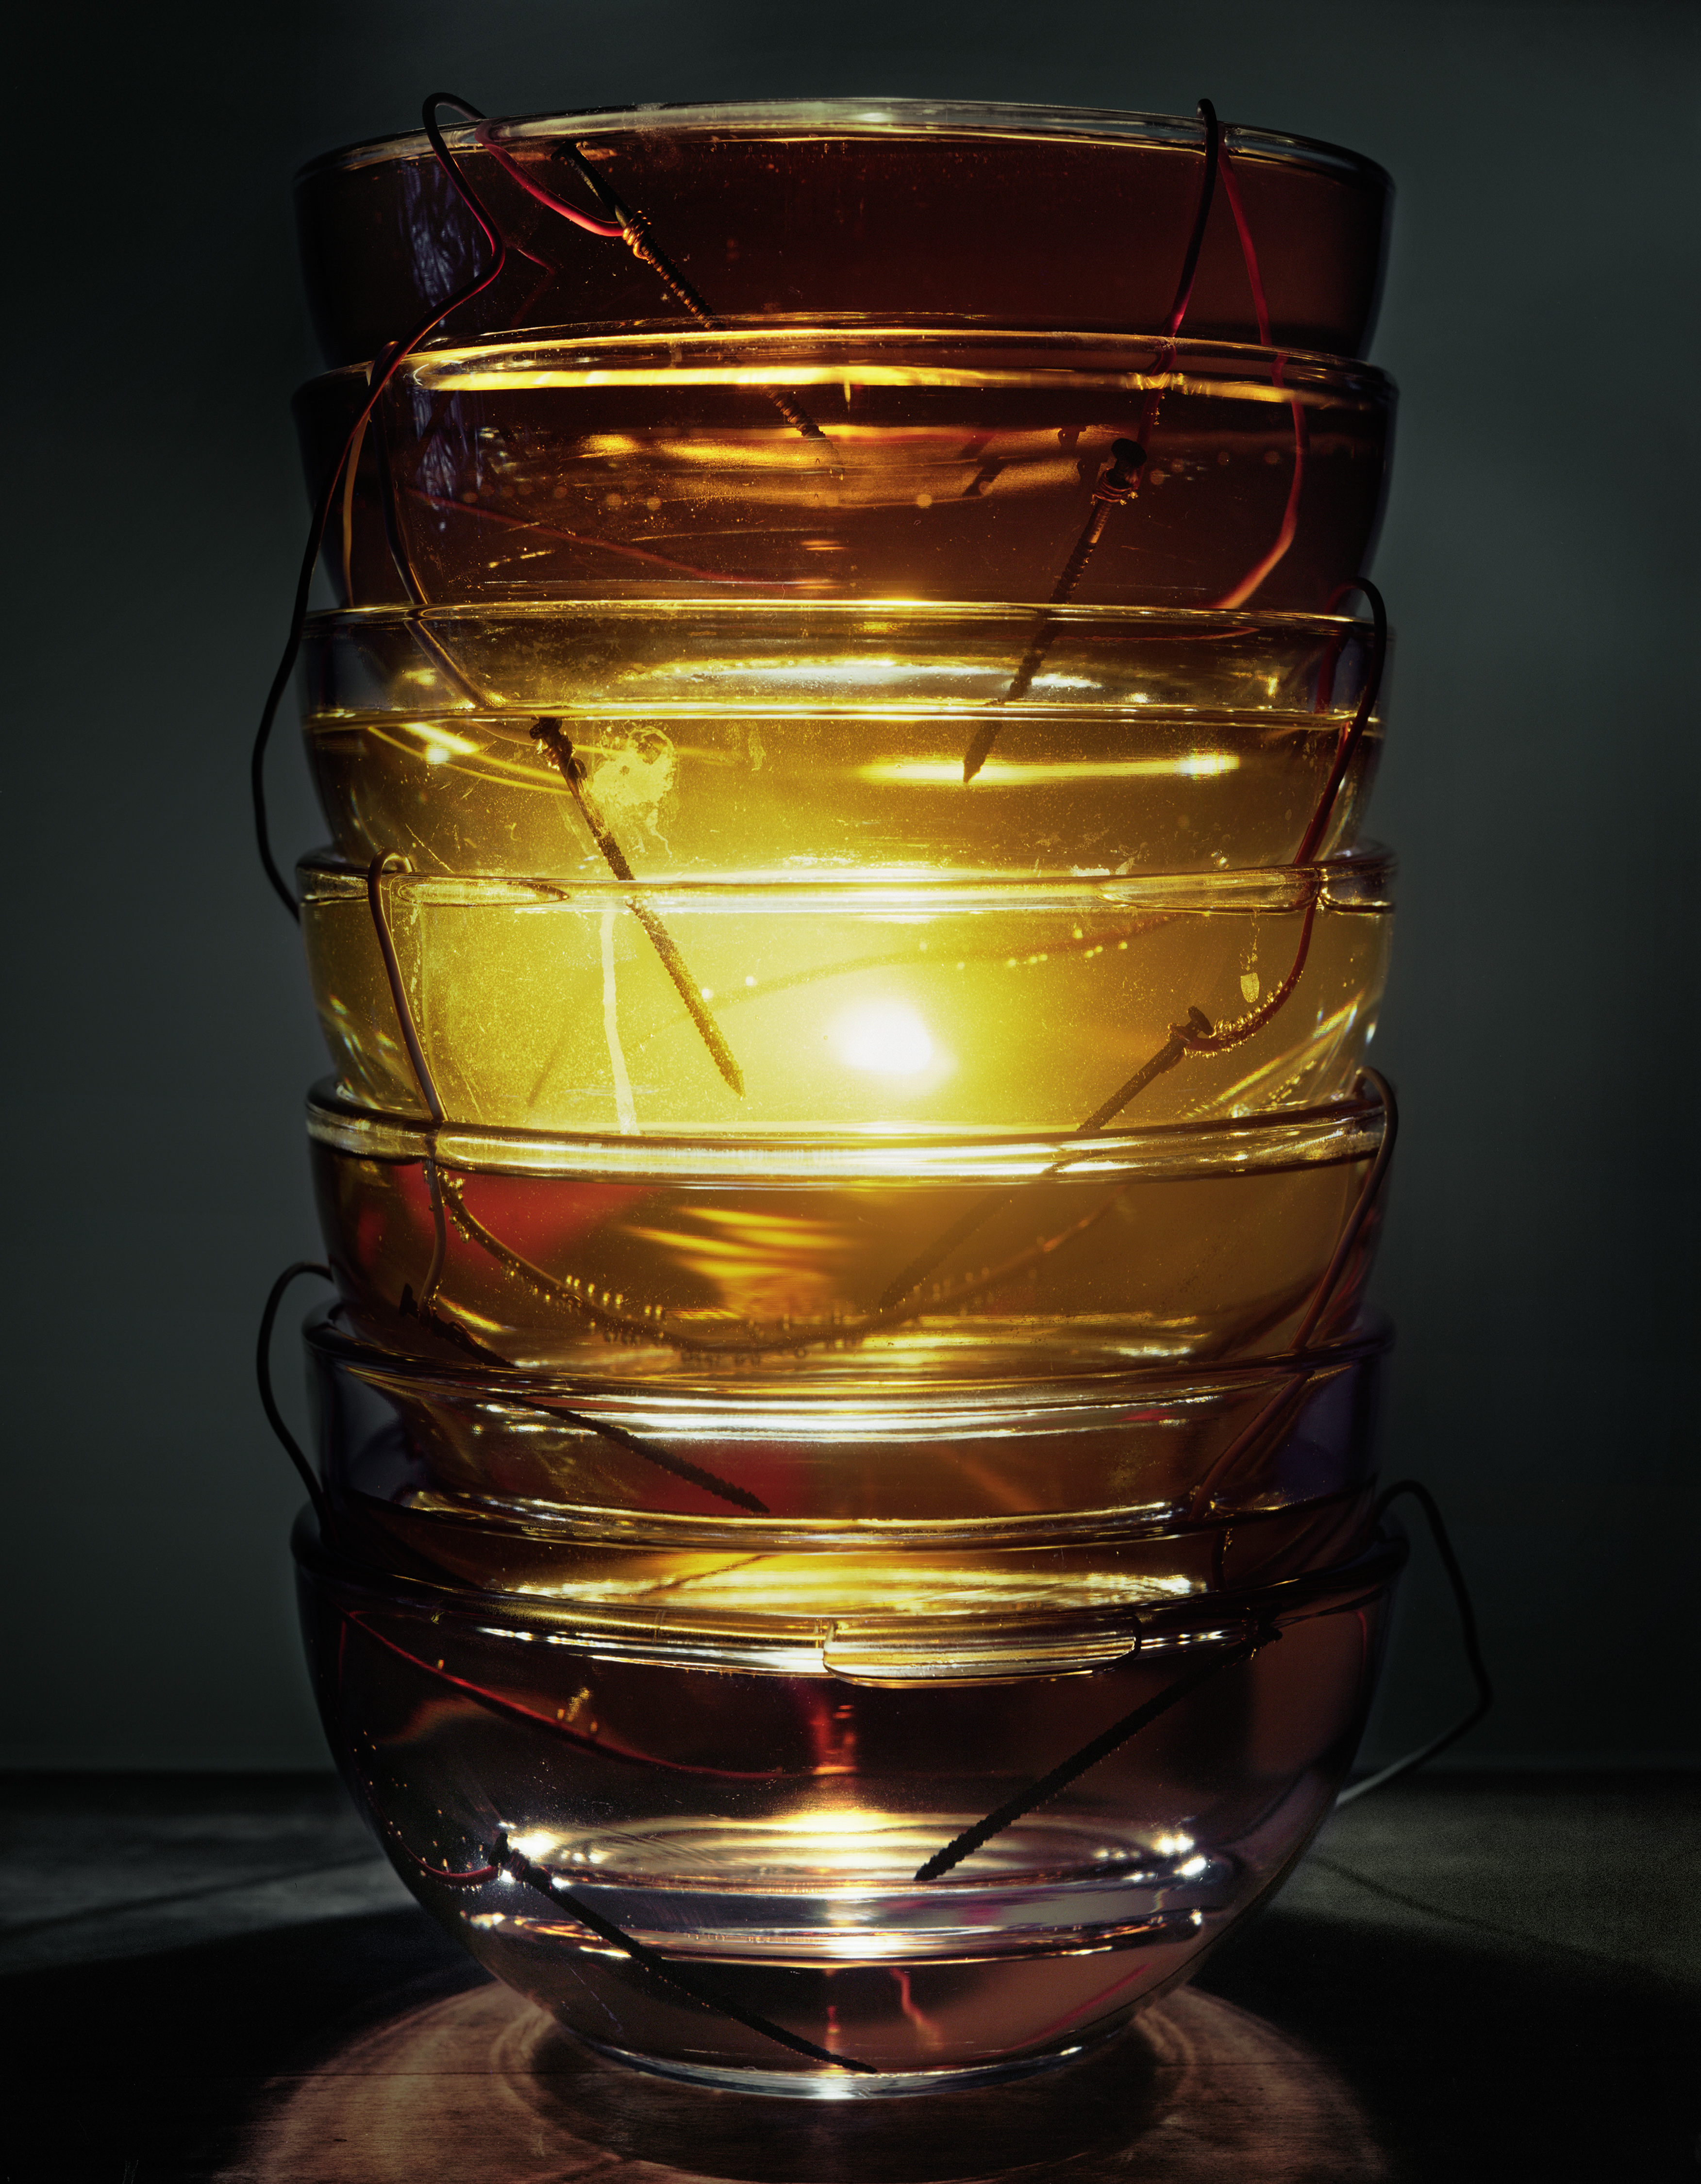 Back to Light - Vinegar Battery with Glass Bowls, 2014